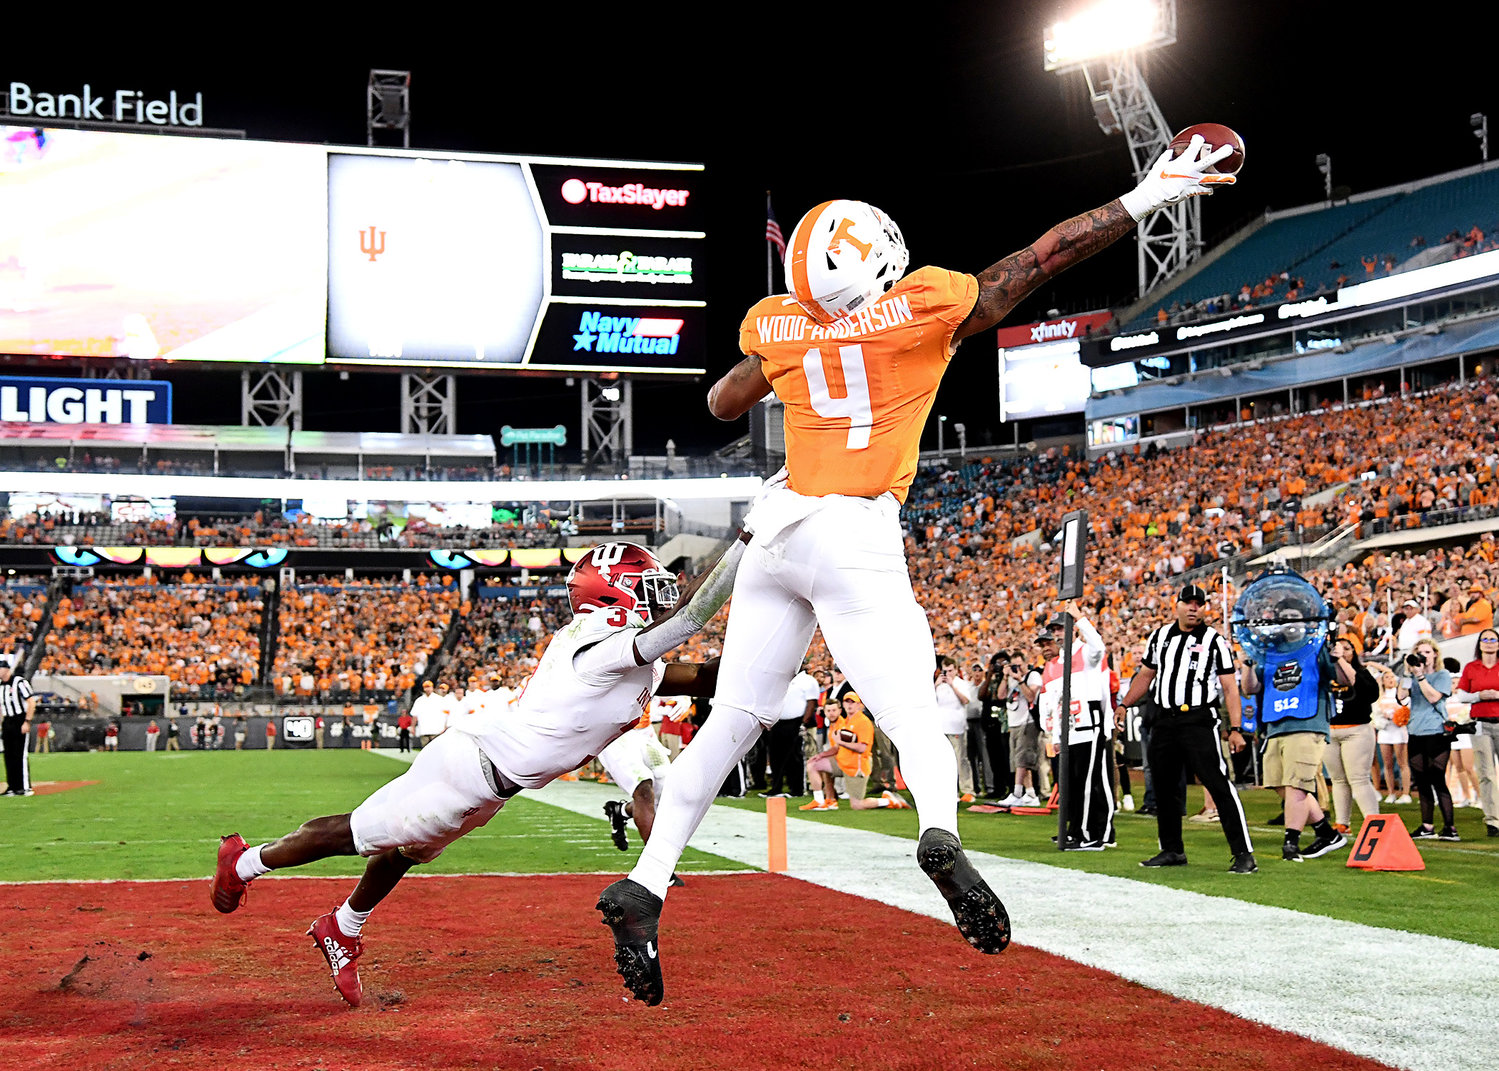 Tennessee Volunteers tight end Dominick Wood-Anderson (4) can't make the grab on an overthrow pass to the end zone during the first half of the Gator Bowl NCAA football game against the Indiana Hoosiers Thursday, January 2, 2020, at TIAA Bank Field in Jacksonville, Fla.